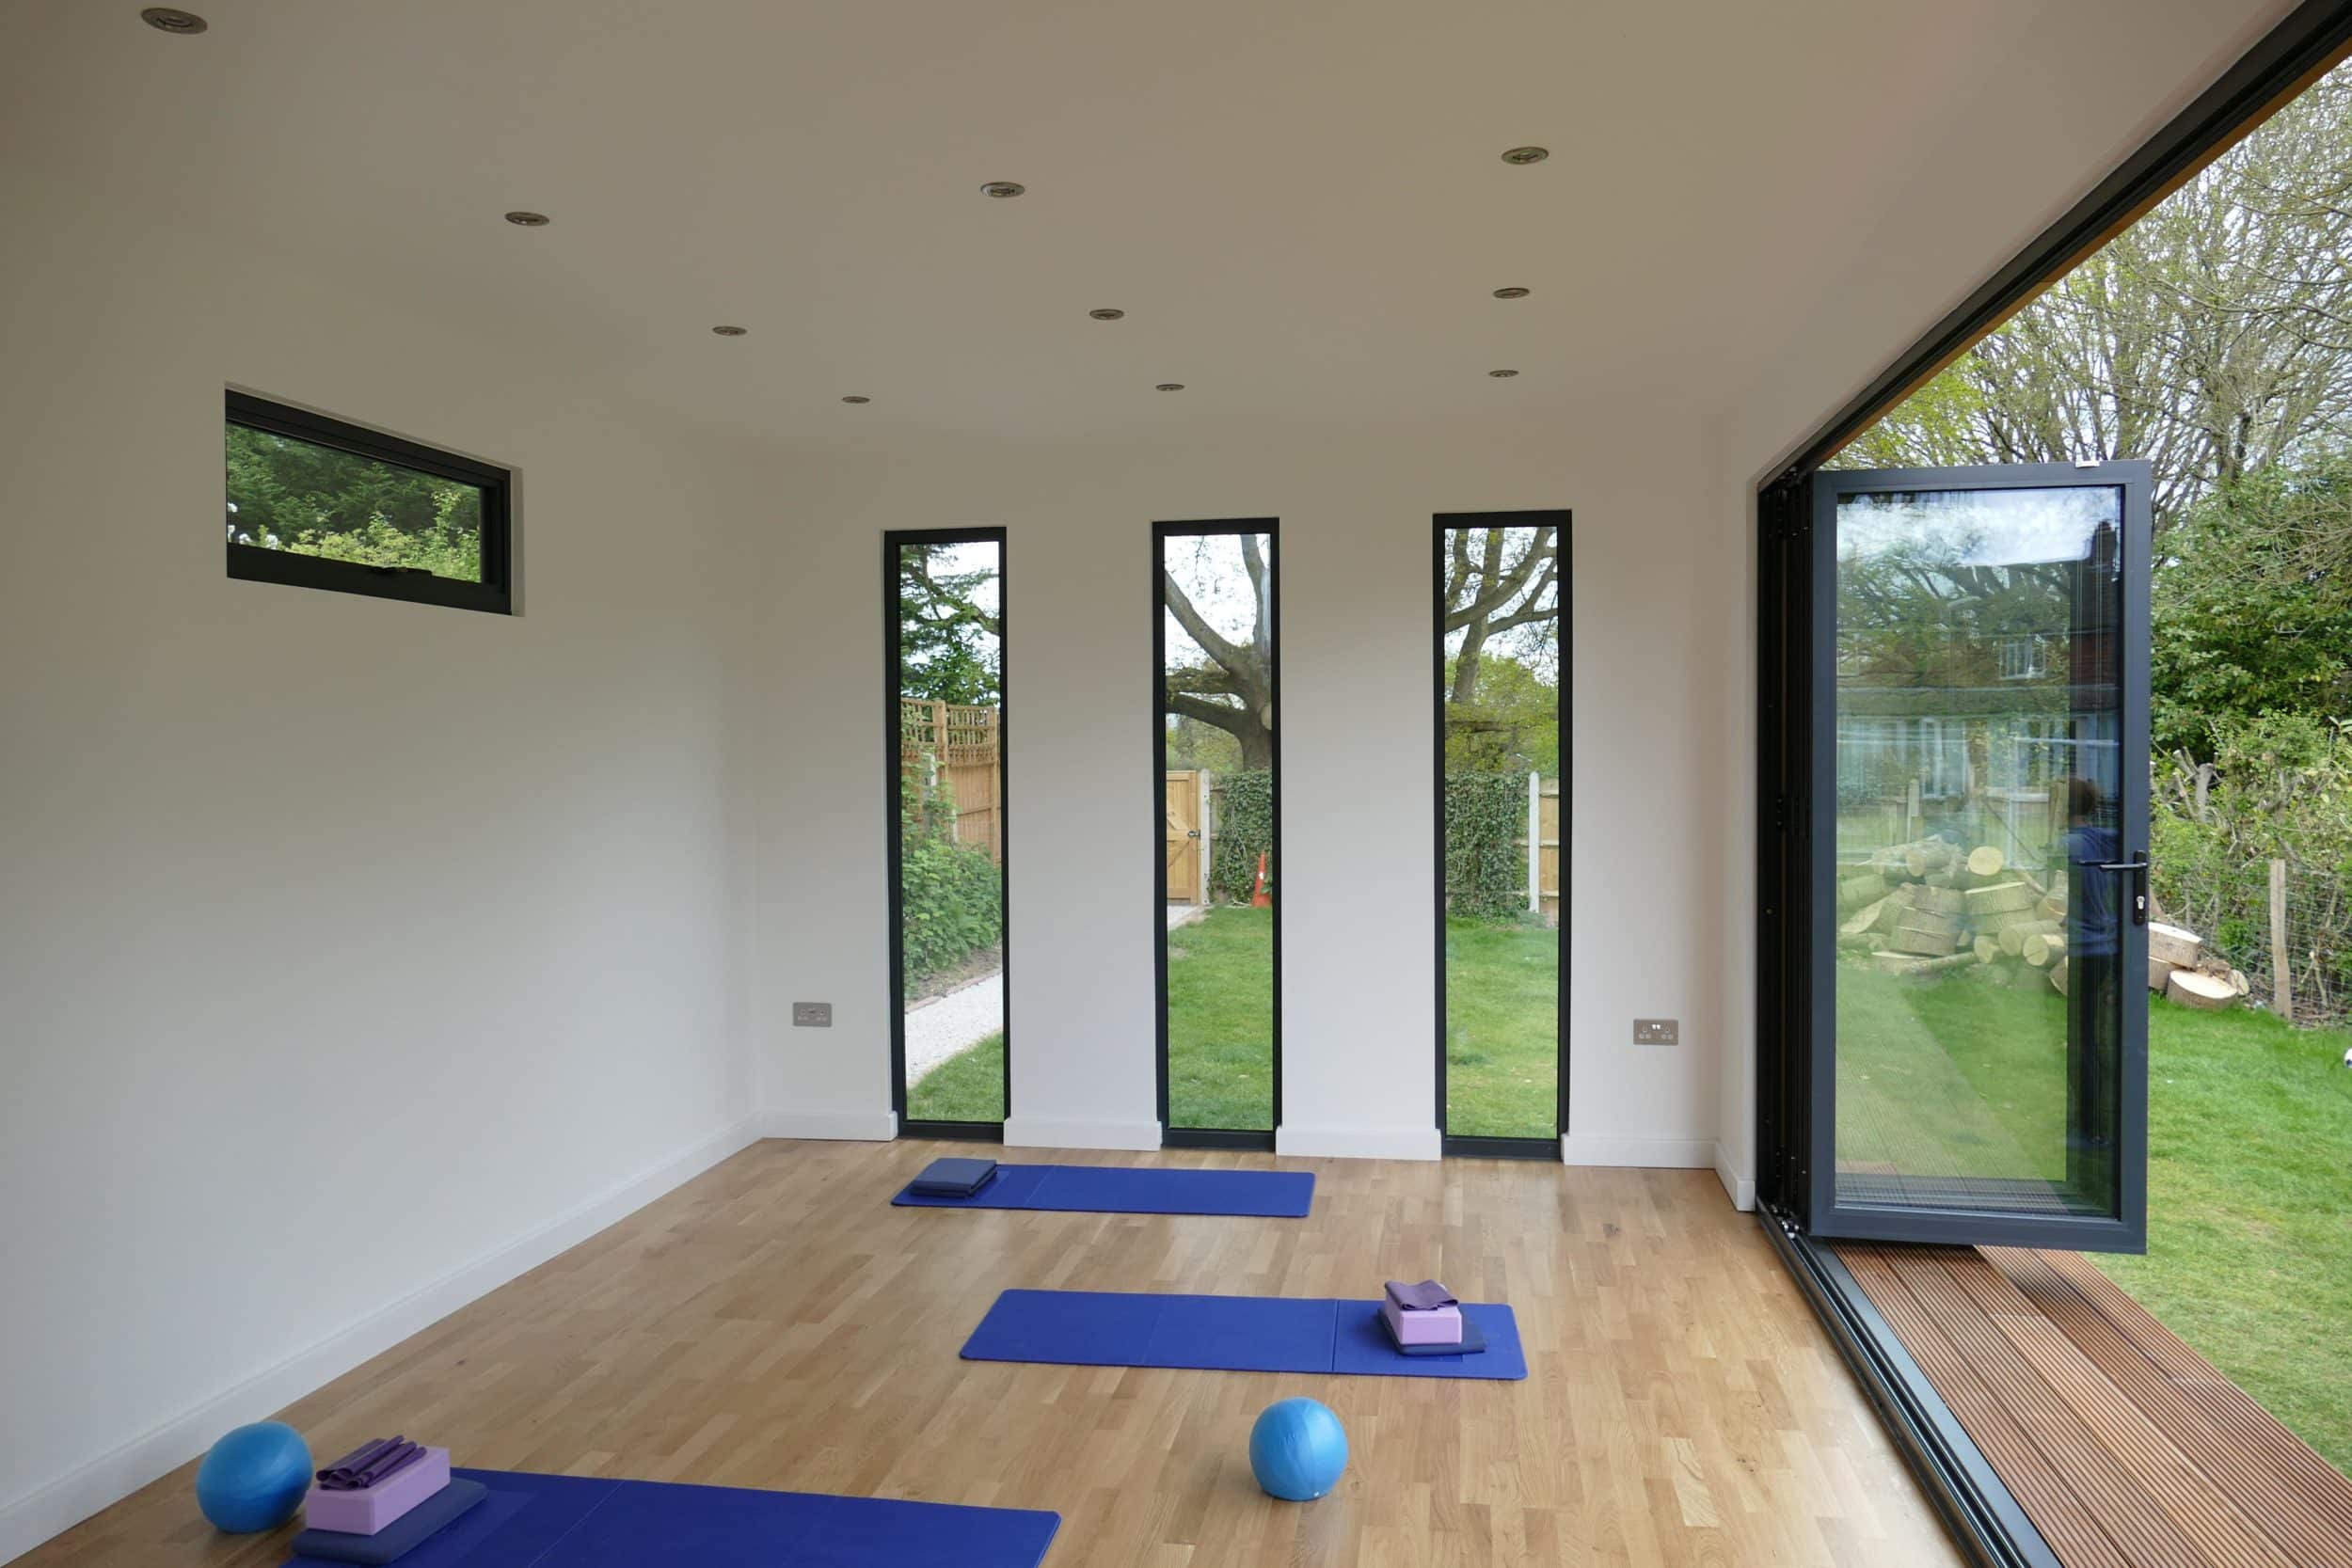 5 Important Things to Consider When Building a Garden Gym